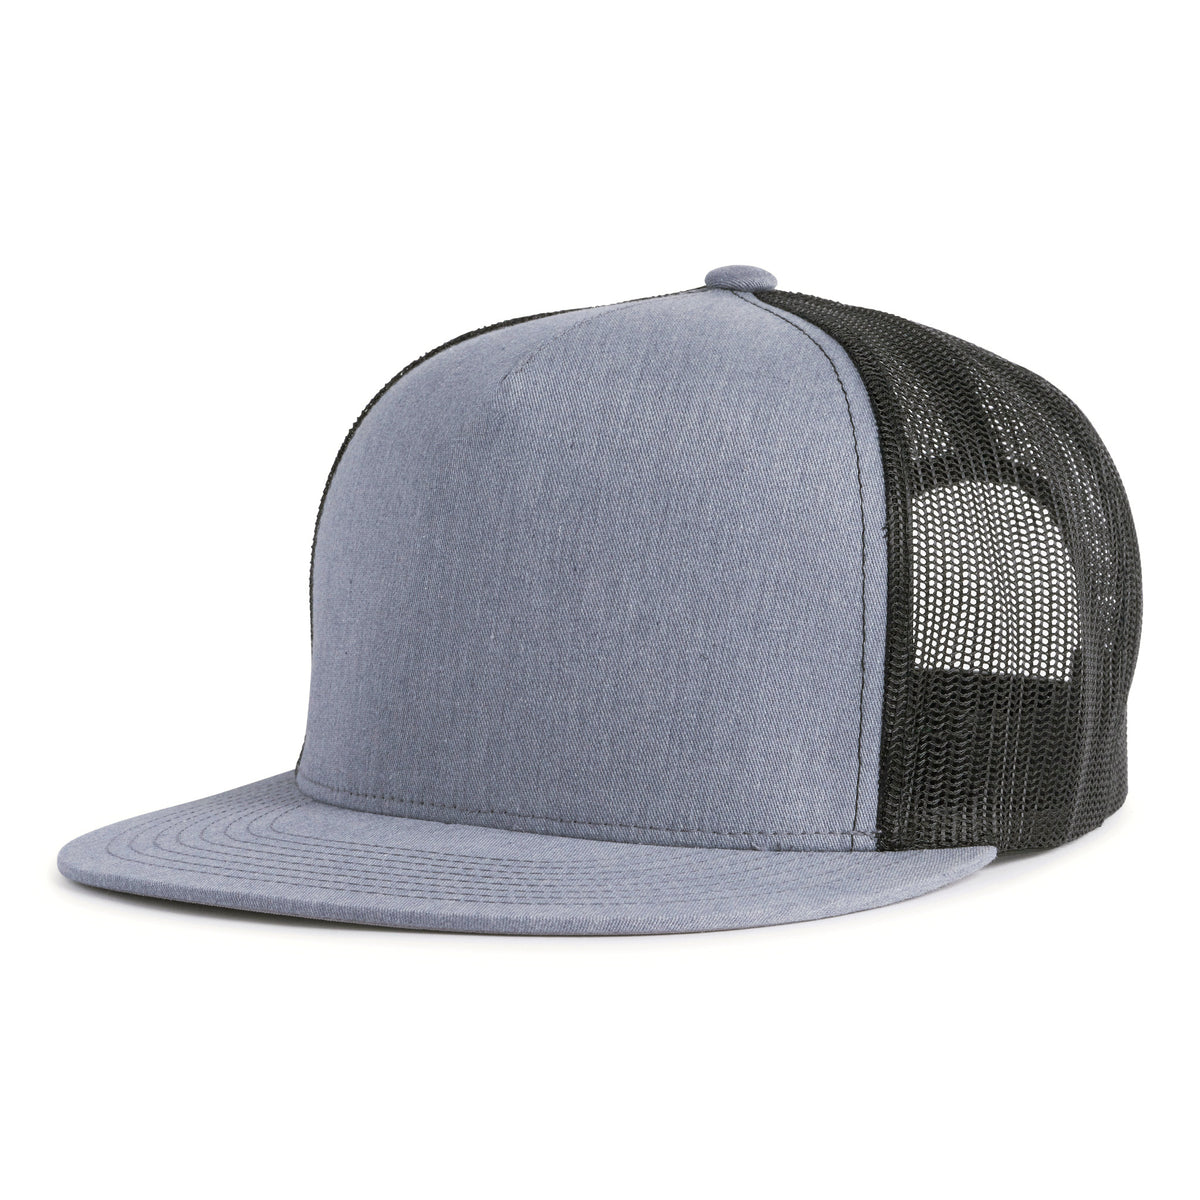 Heather grey trucker hat with a flat bill, 5-panels, structured high crown, black mesh back, and a snapback closure from Tailgate Hats.